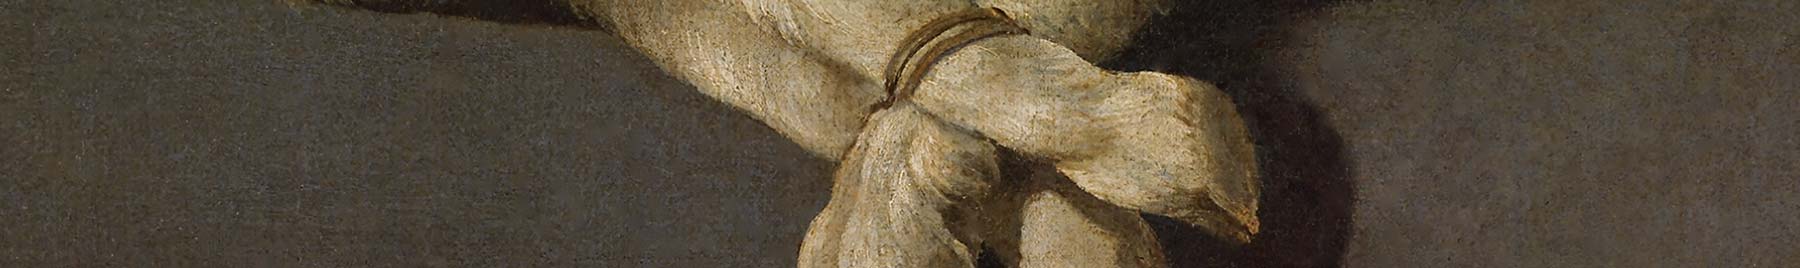 detail of a painting of a lamb